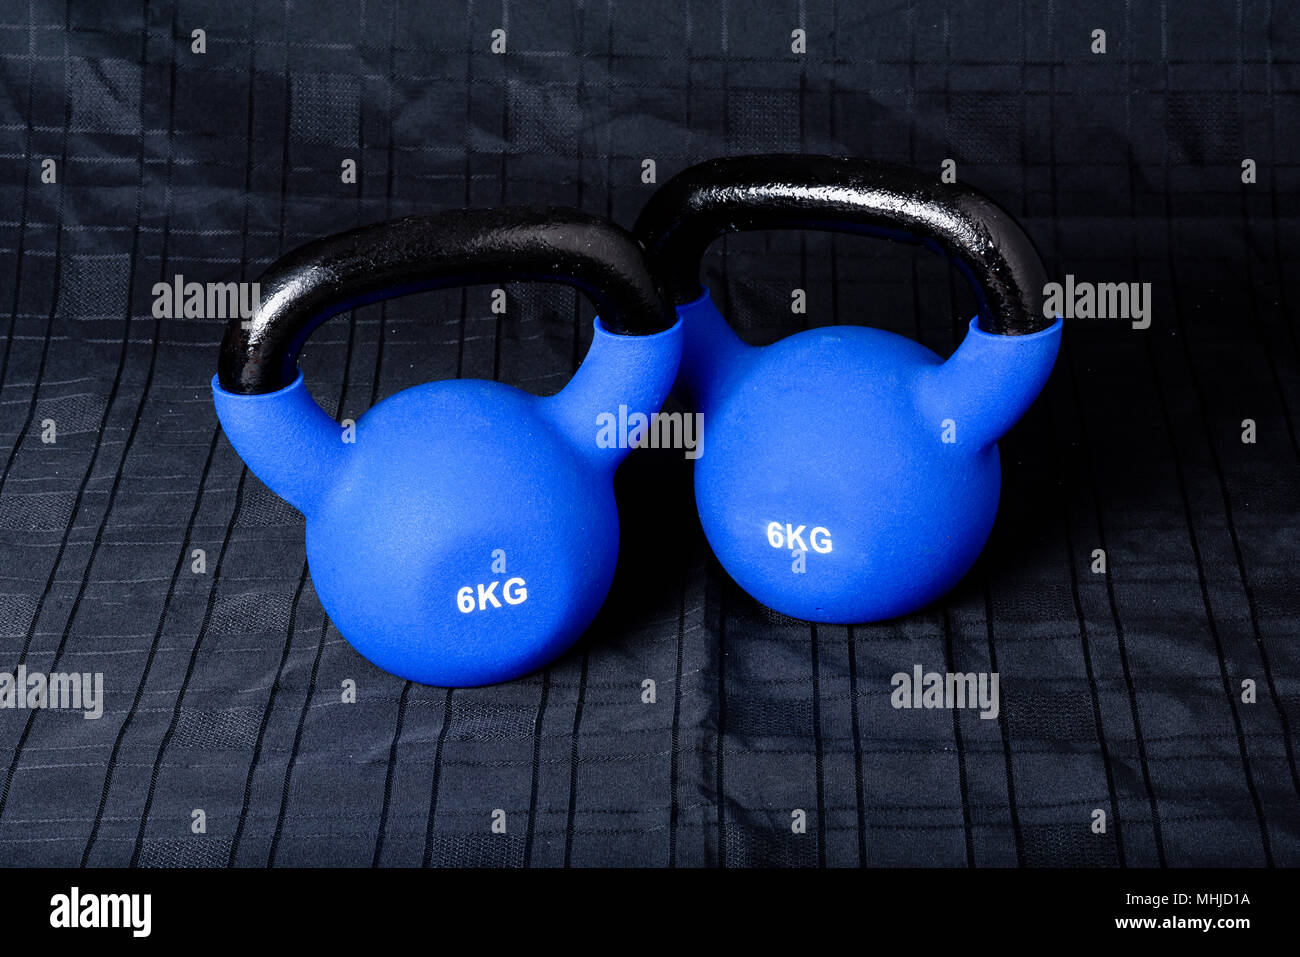 Kettle Bell Weights Stock Photo